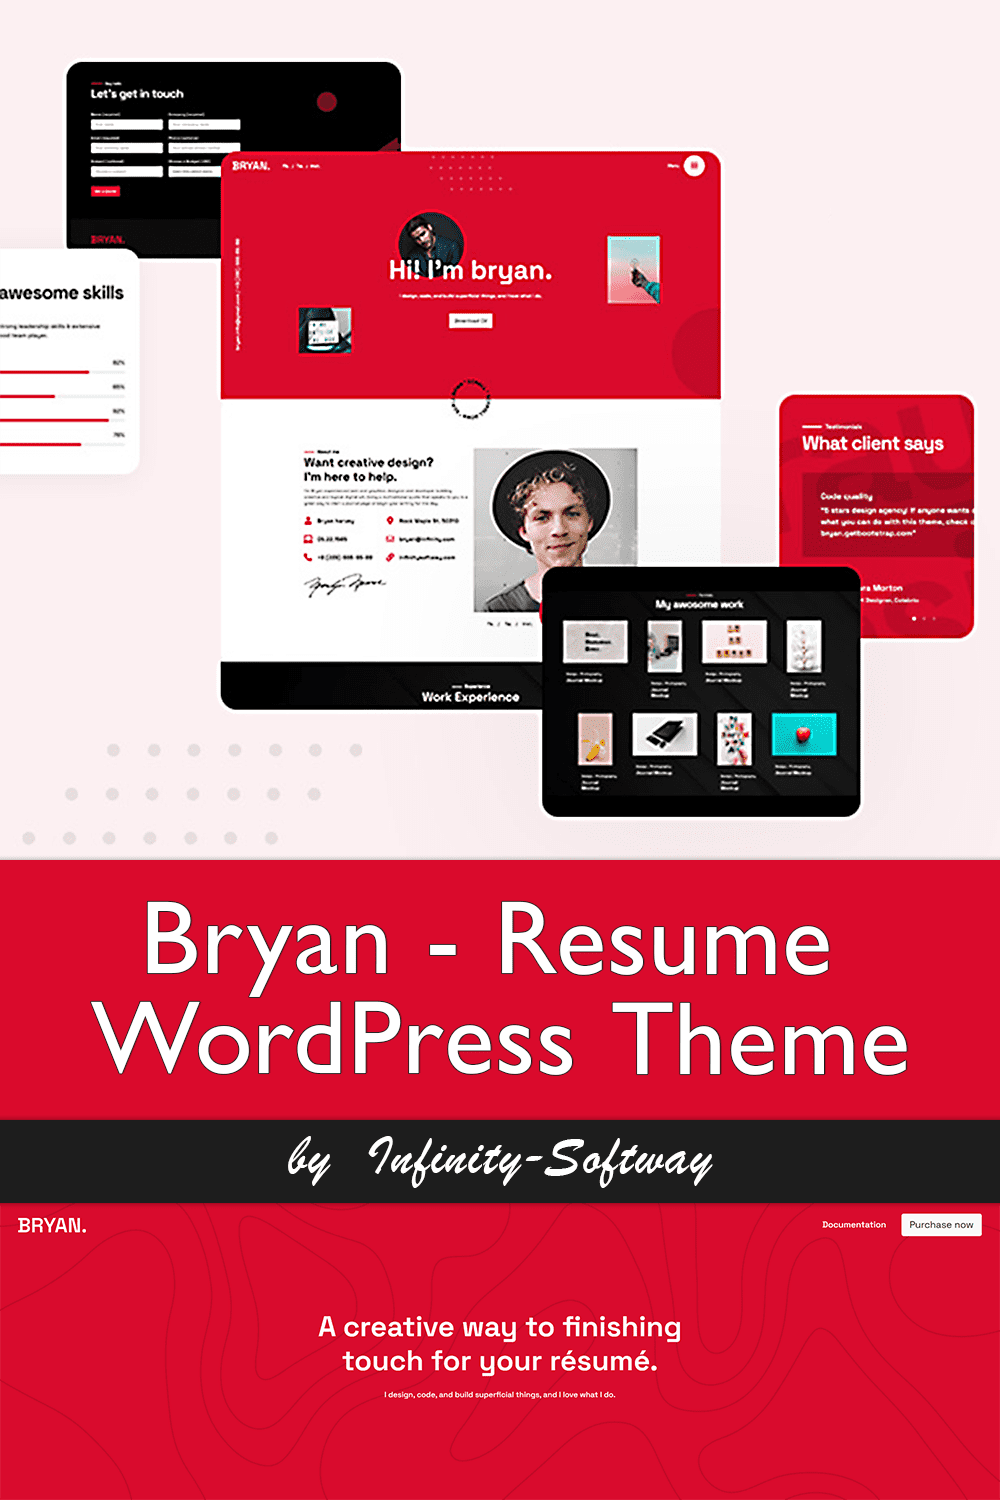 What client says about Bryan - Resume WordPress Theme.